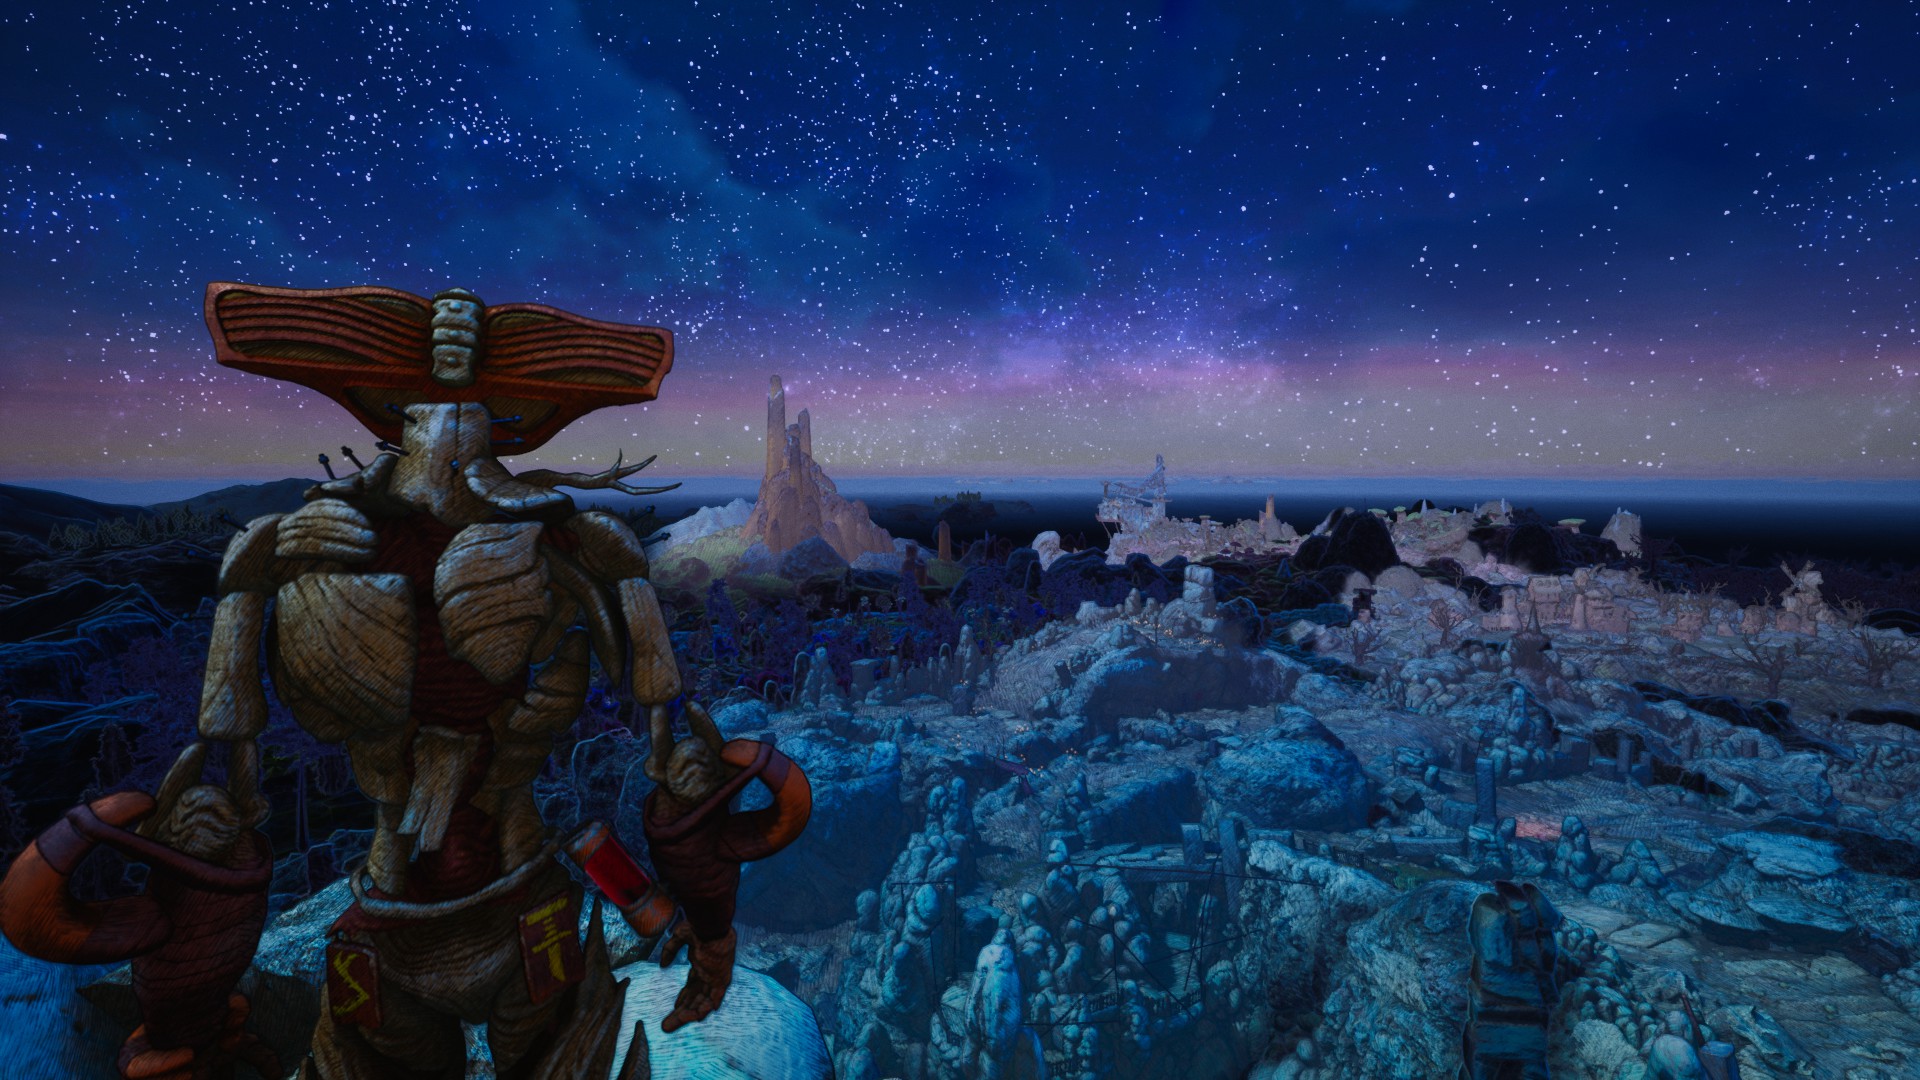 Pseudo, in his wooden form, looking at the landscape at night in Clash: Artifacts of Chaos.